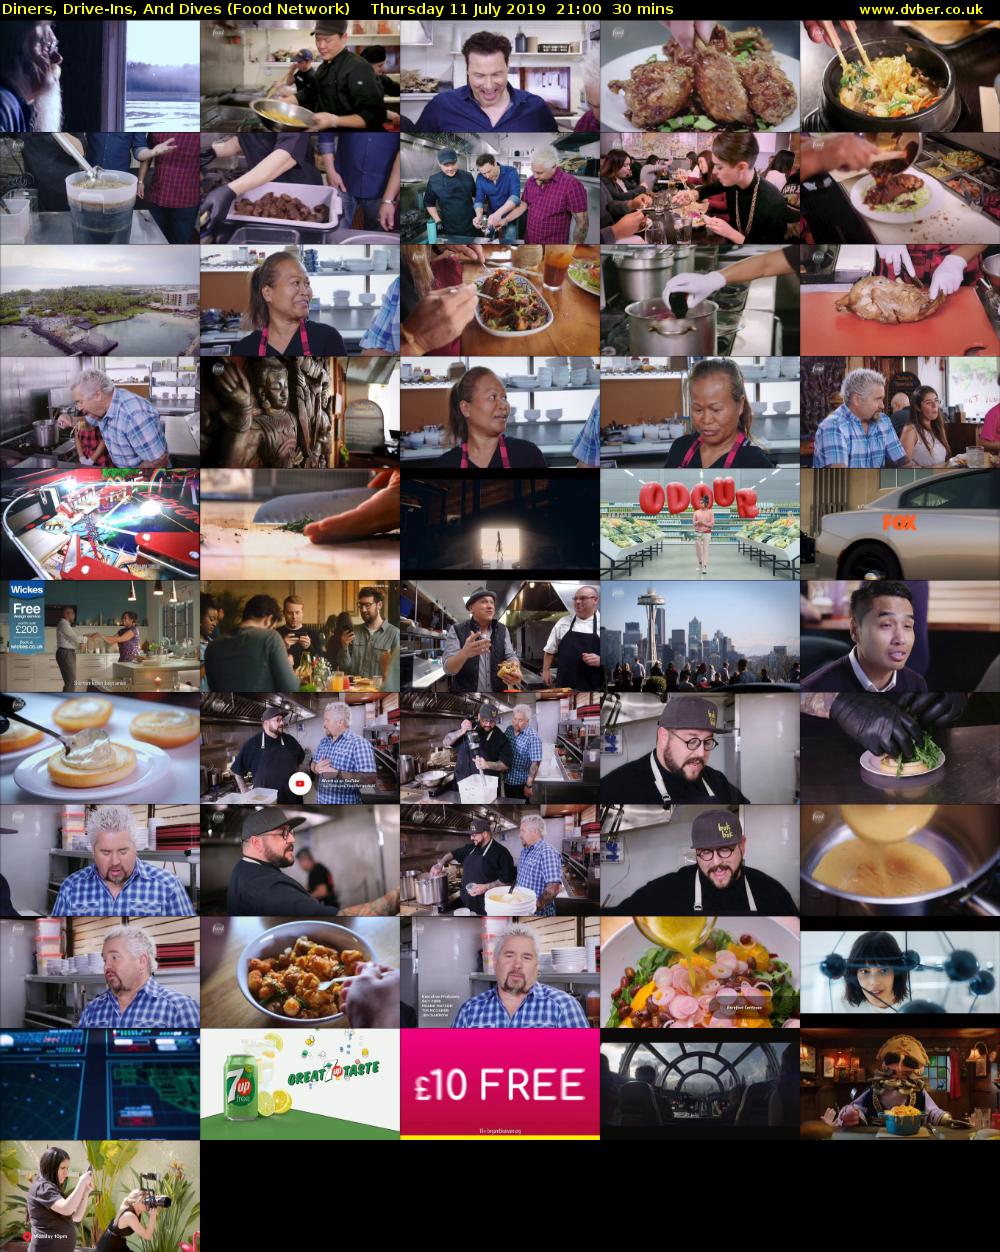 Diners, Drive-Ins, And Dives (Food Network) Thursday 11 July 2019 21:00 - 21:30